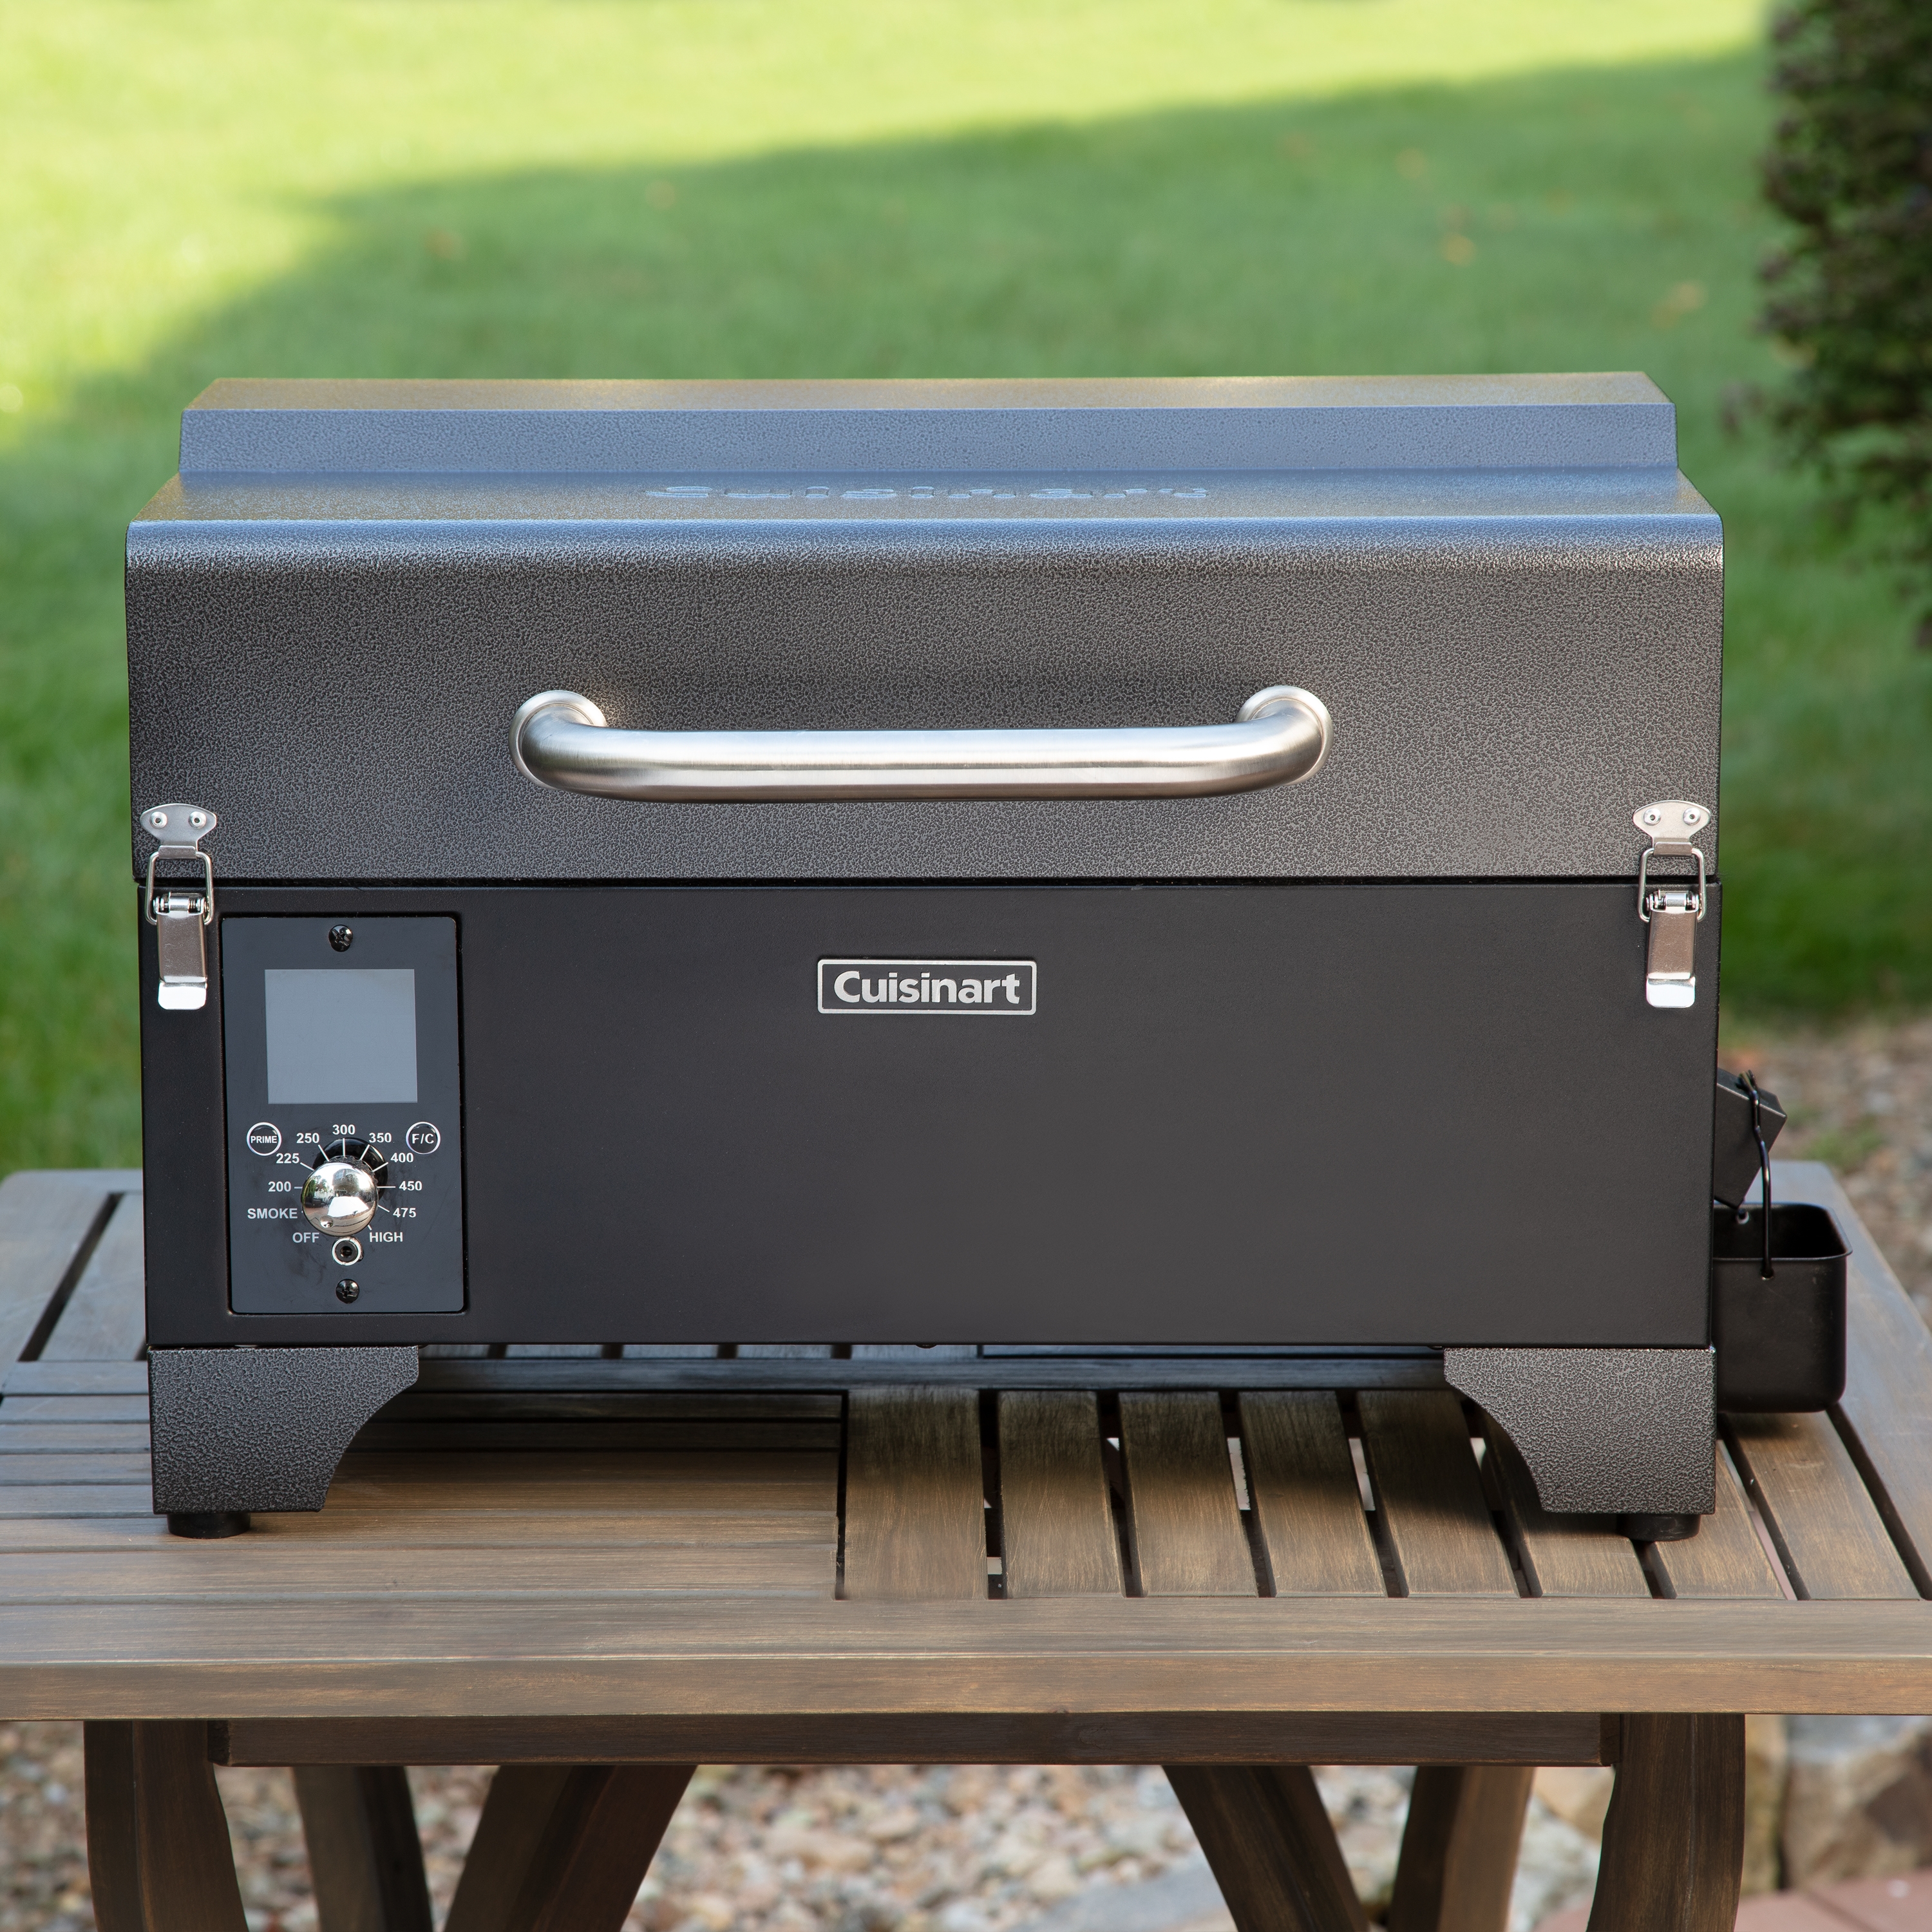 Portable Wood Pellet Grill and Smoker